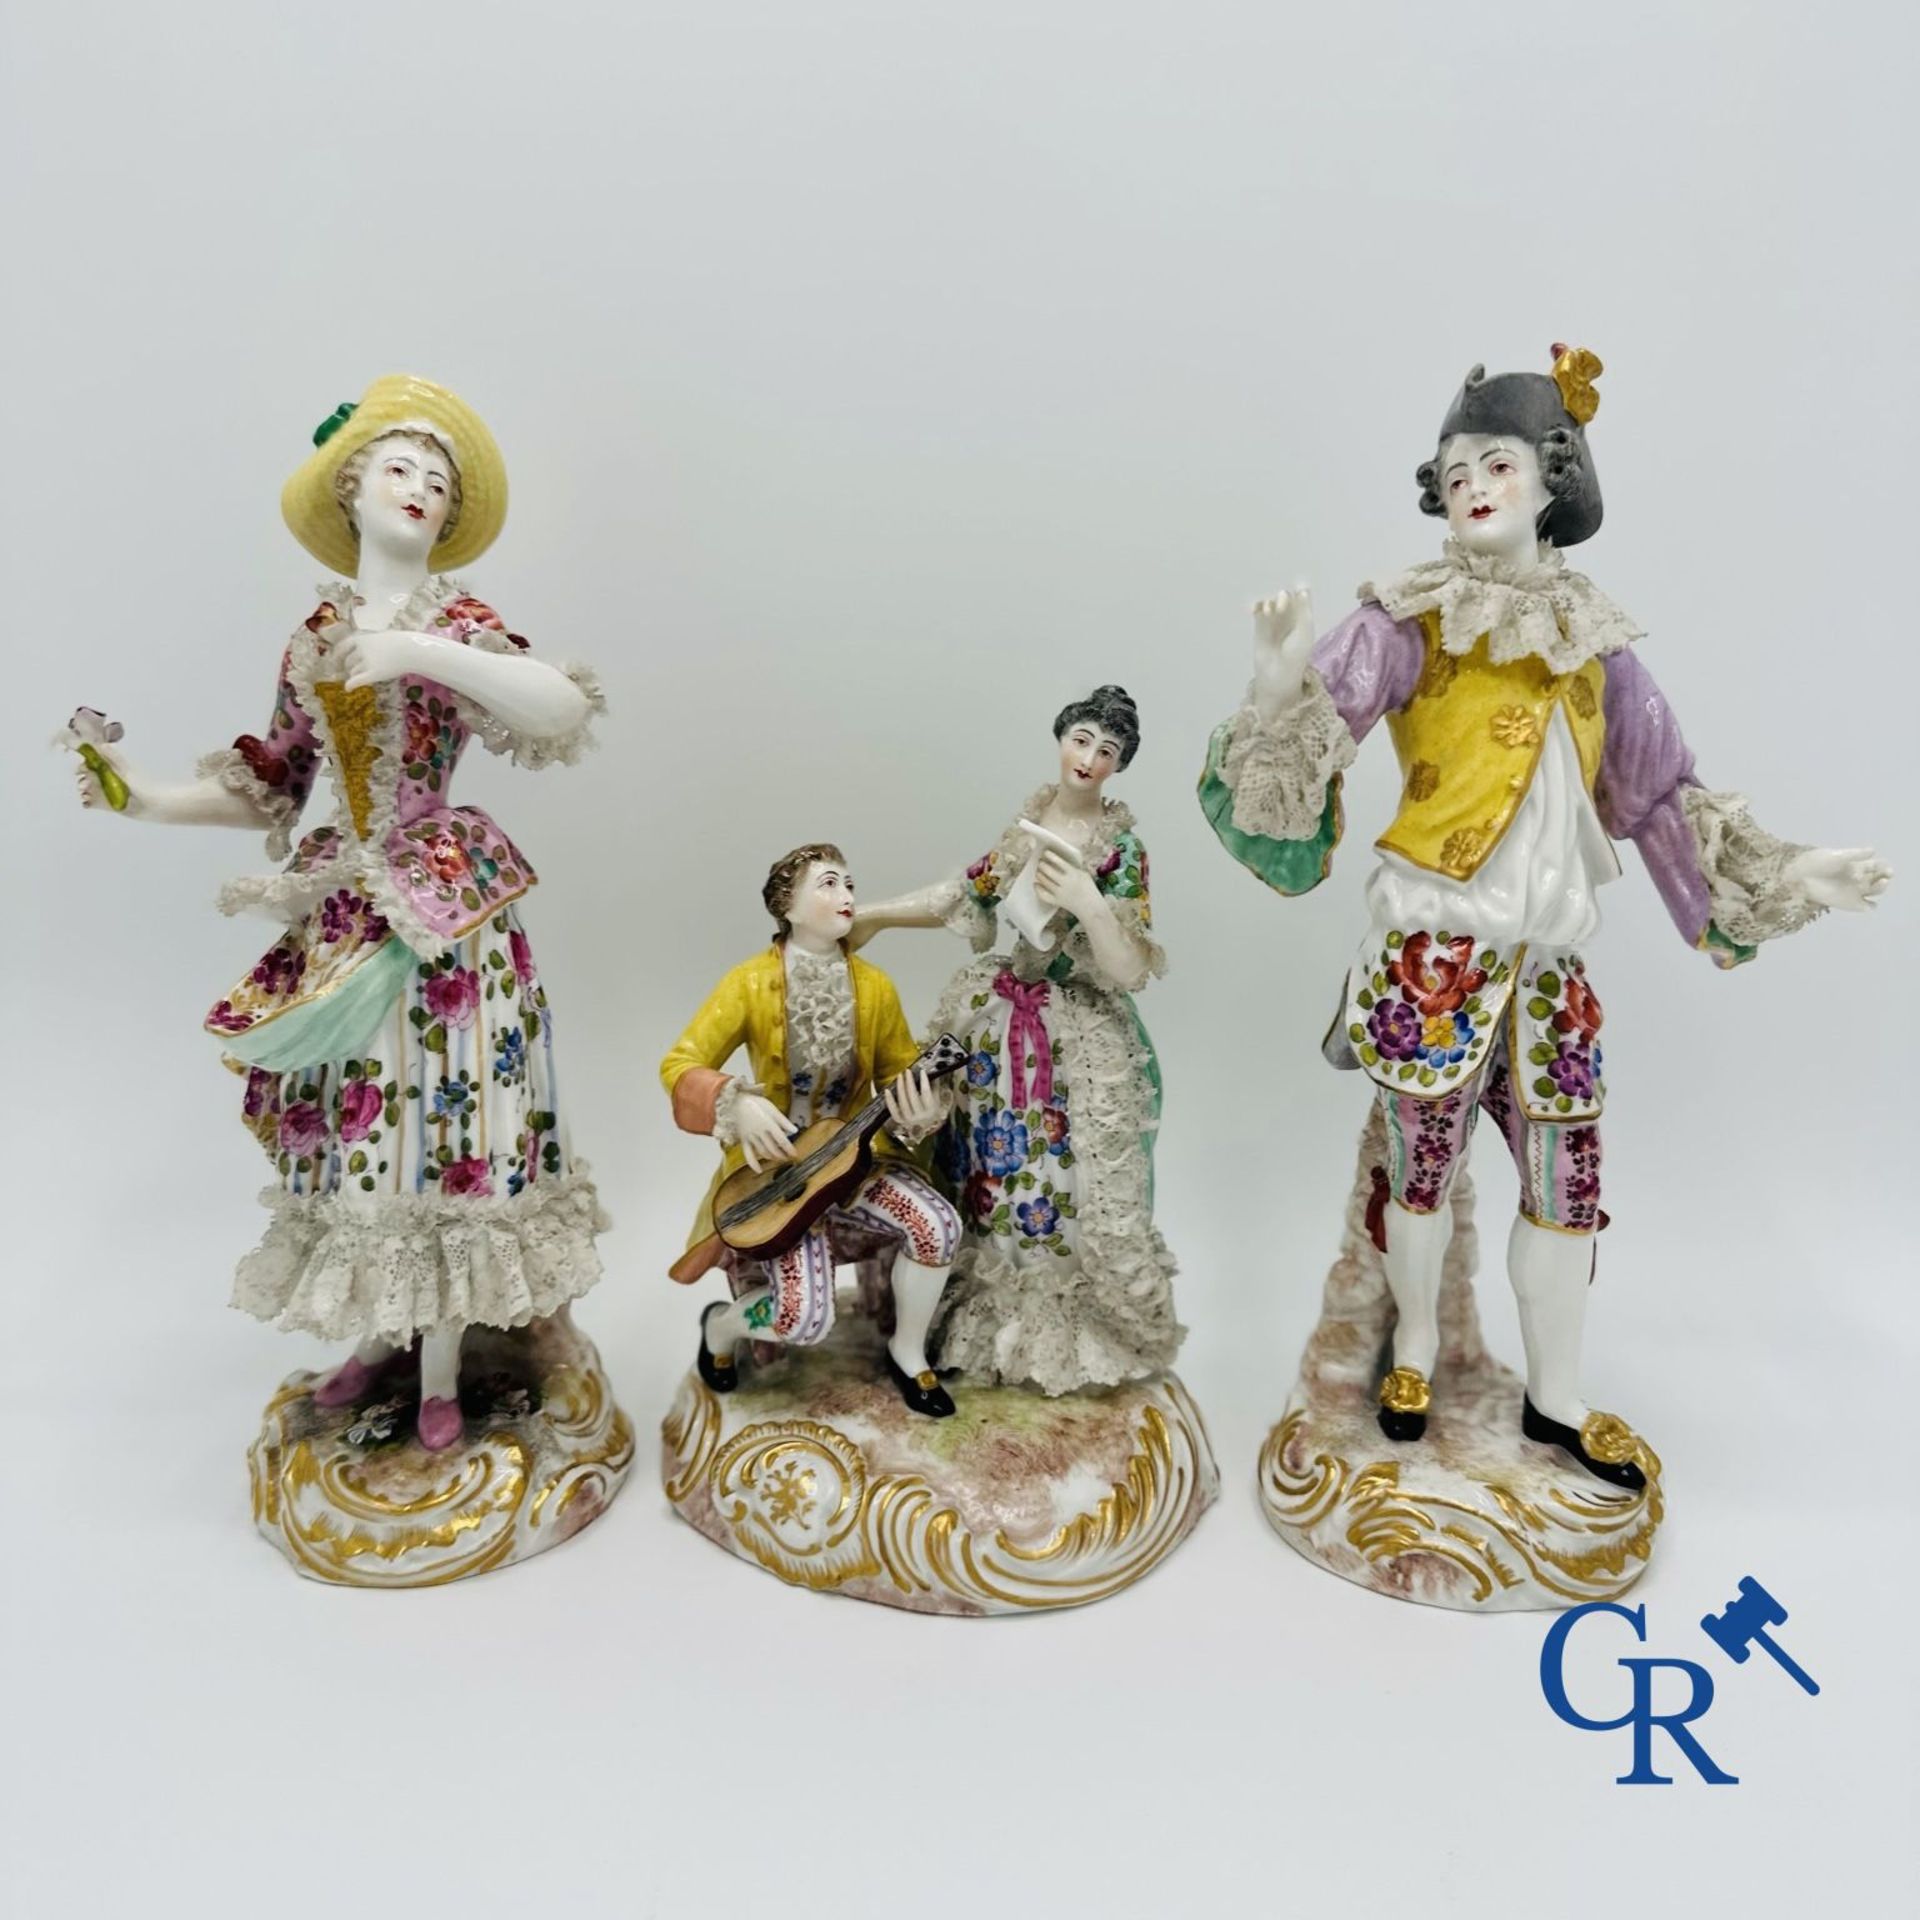 Porcelain: 3 groups of multicoloured decorated porcelain in the style of Meissen. 19th century.